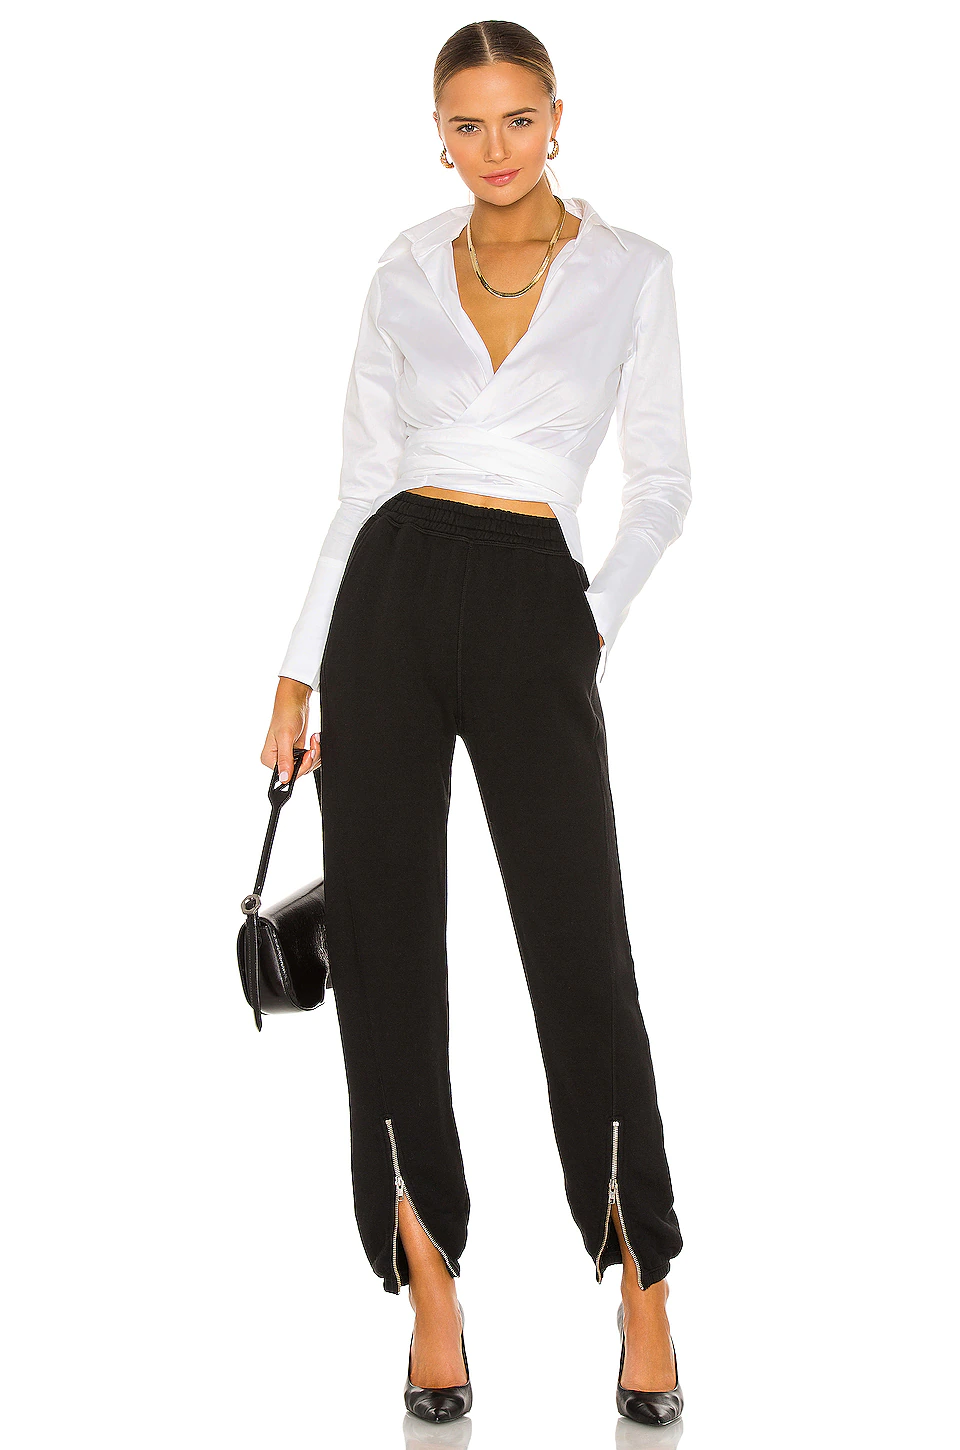 What to Wear With Black Sweatpants - 15 Ideas